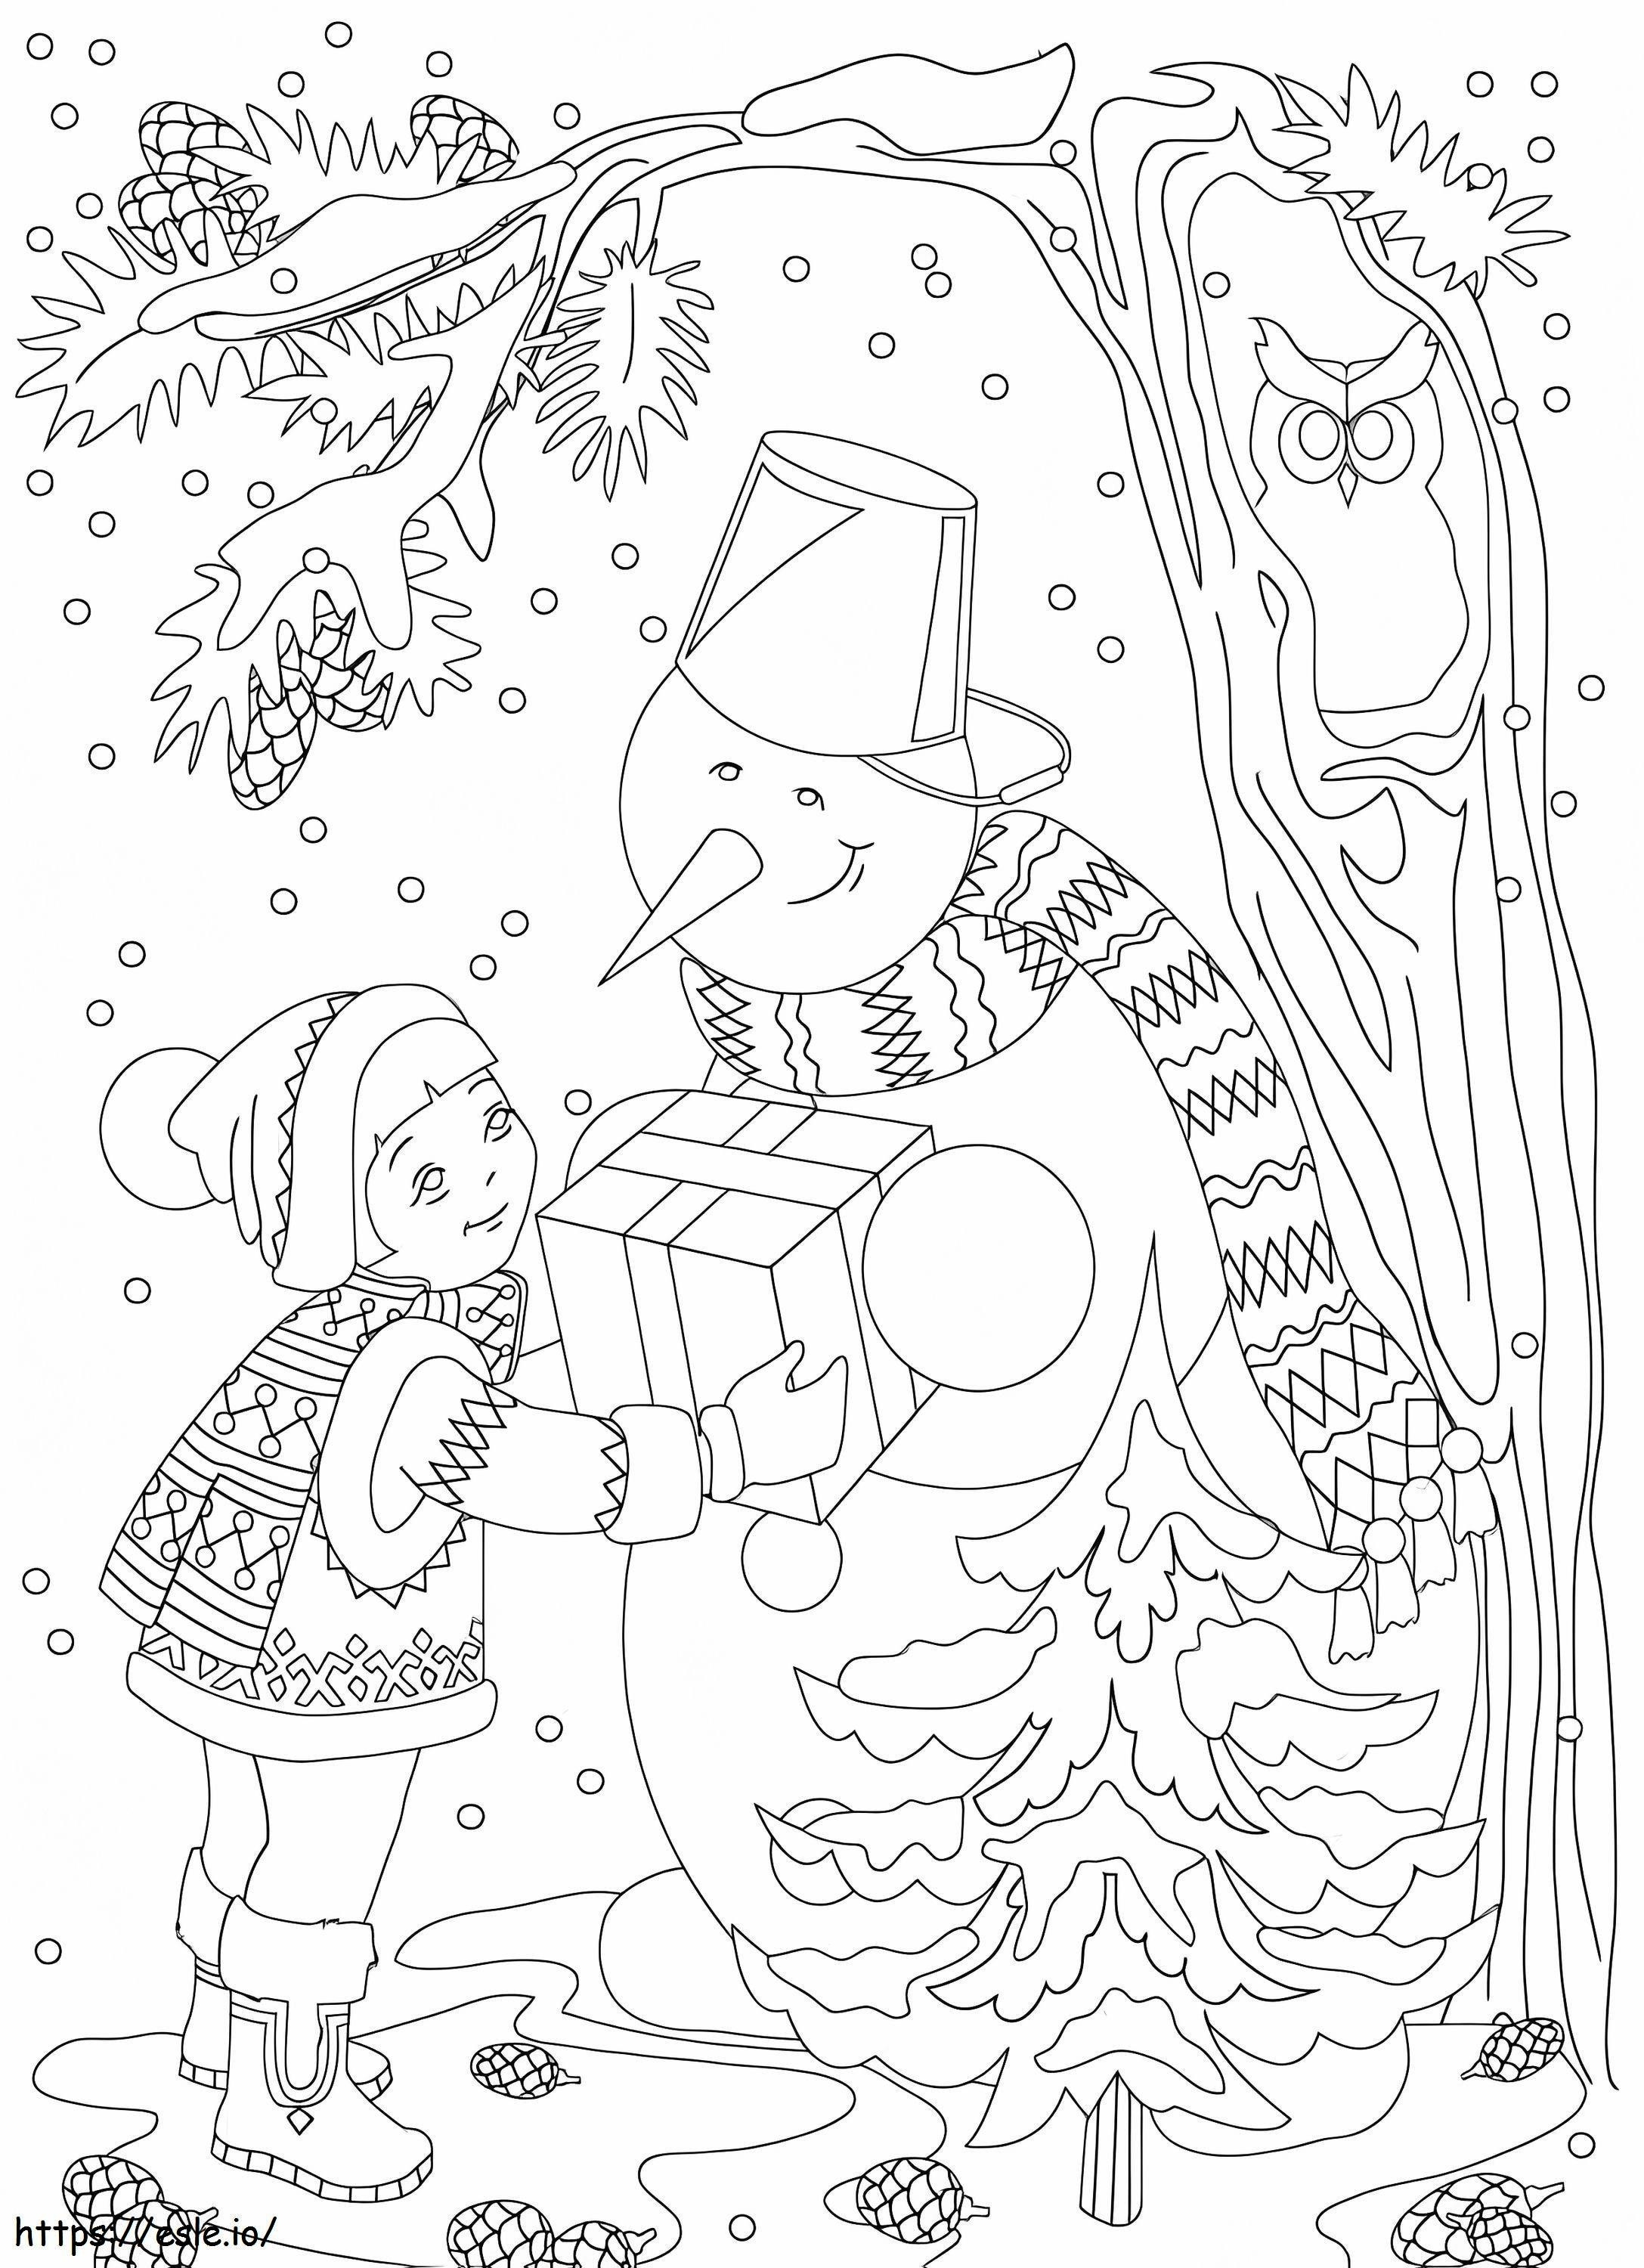 Girl With Snowman coloring page